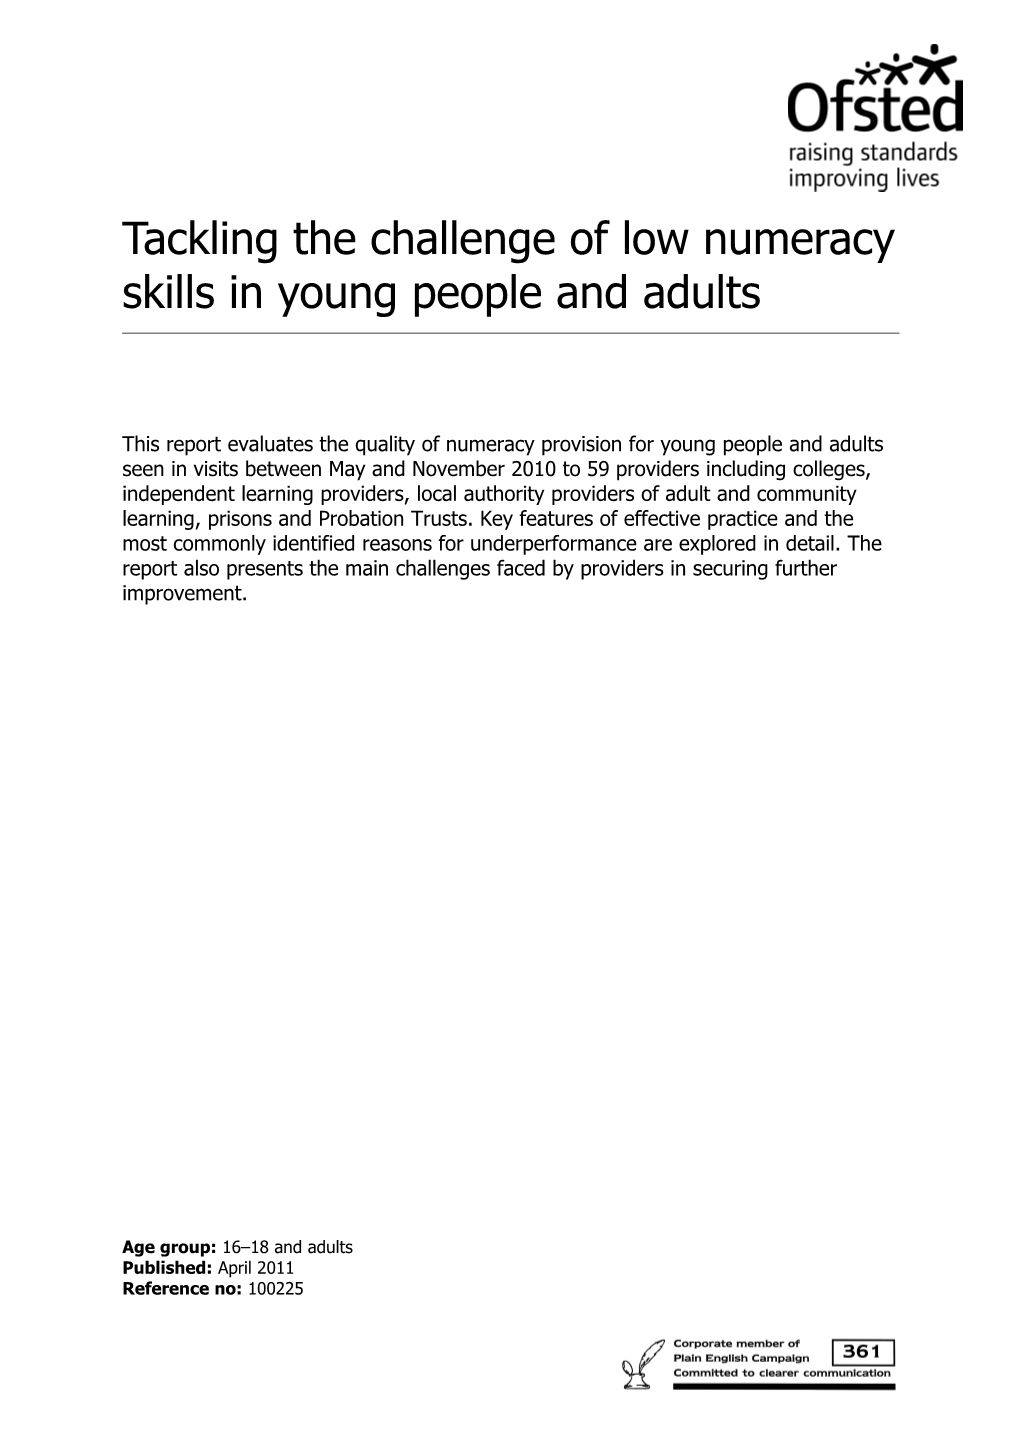 Tackling the Challenge of Low Numeracy Skills in Young People and Adults